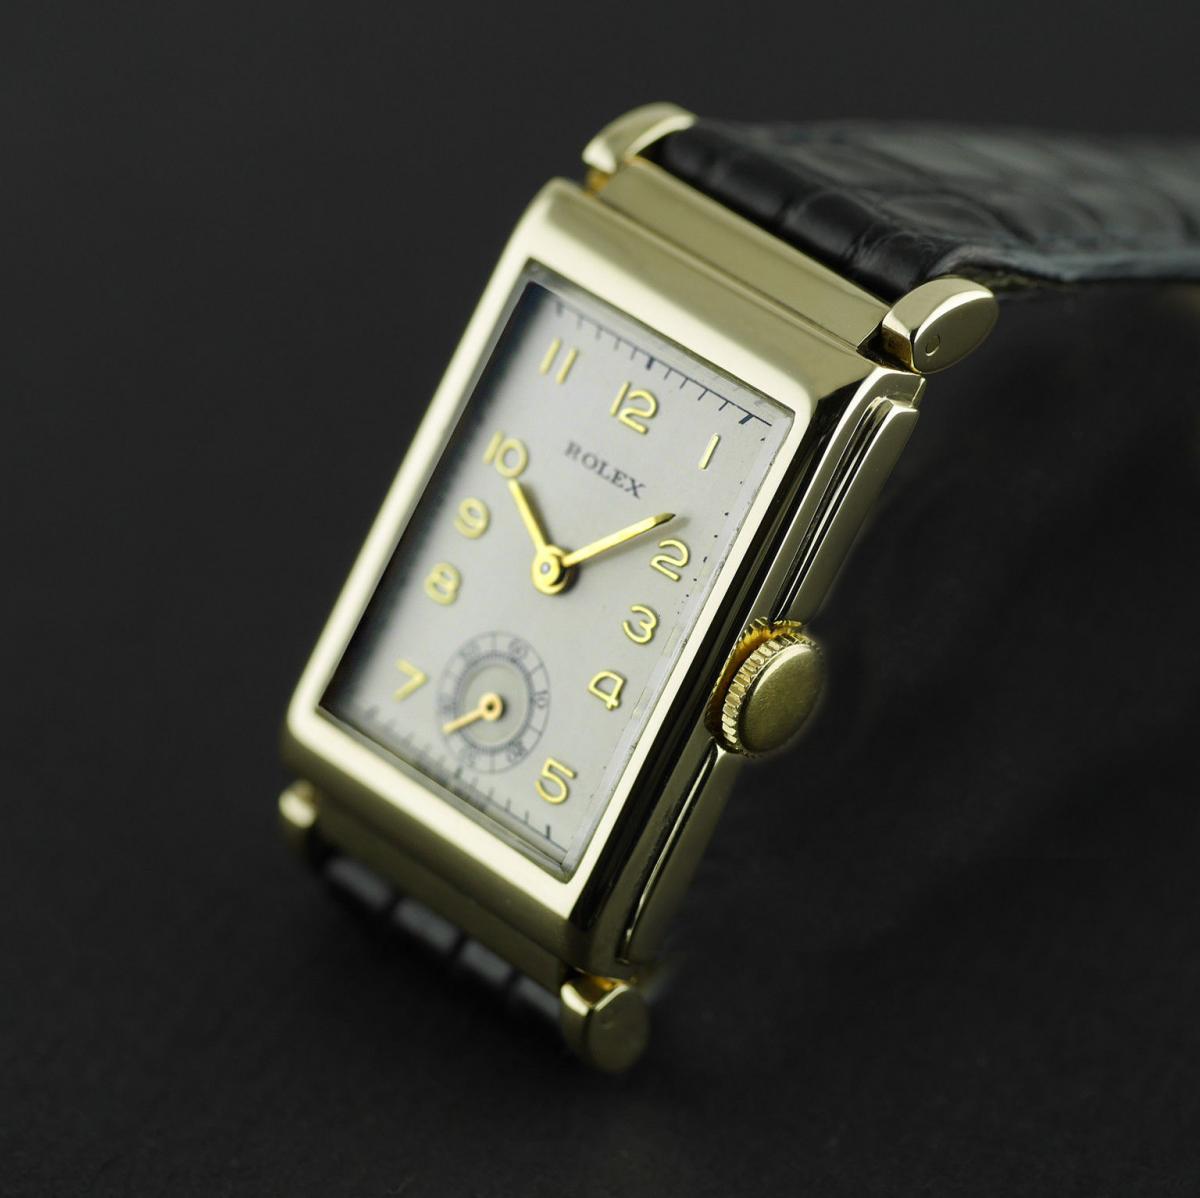 Rolex, Art Deco, Gold dated 1937 With Articulated Lugs